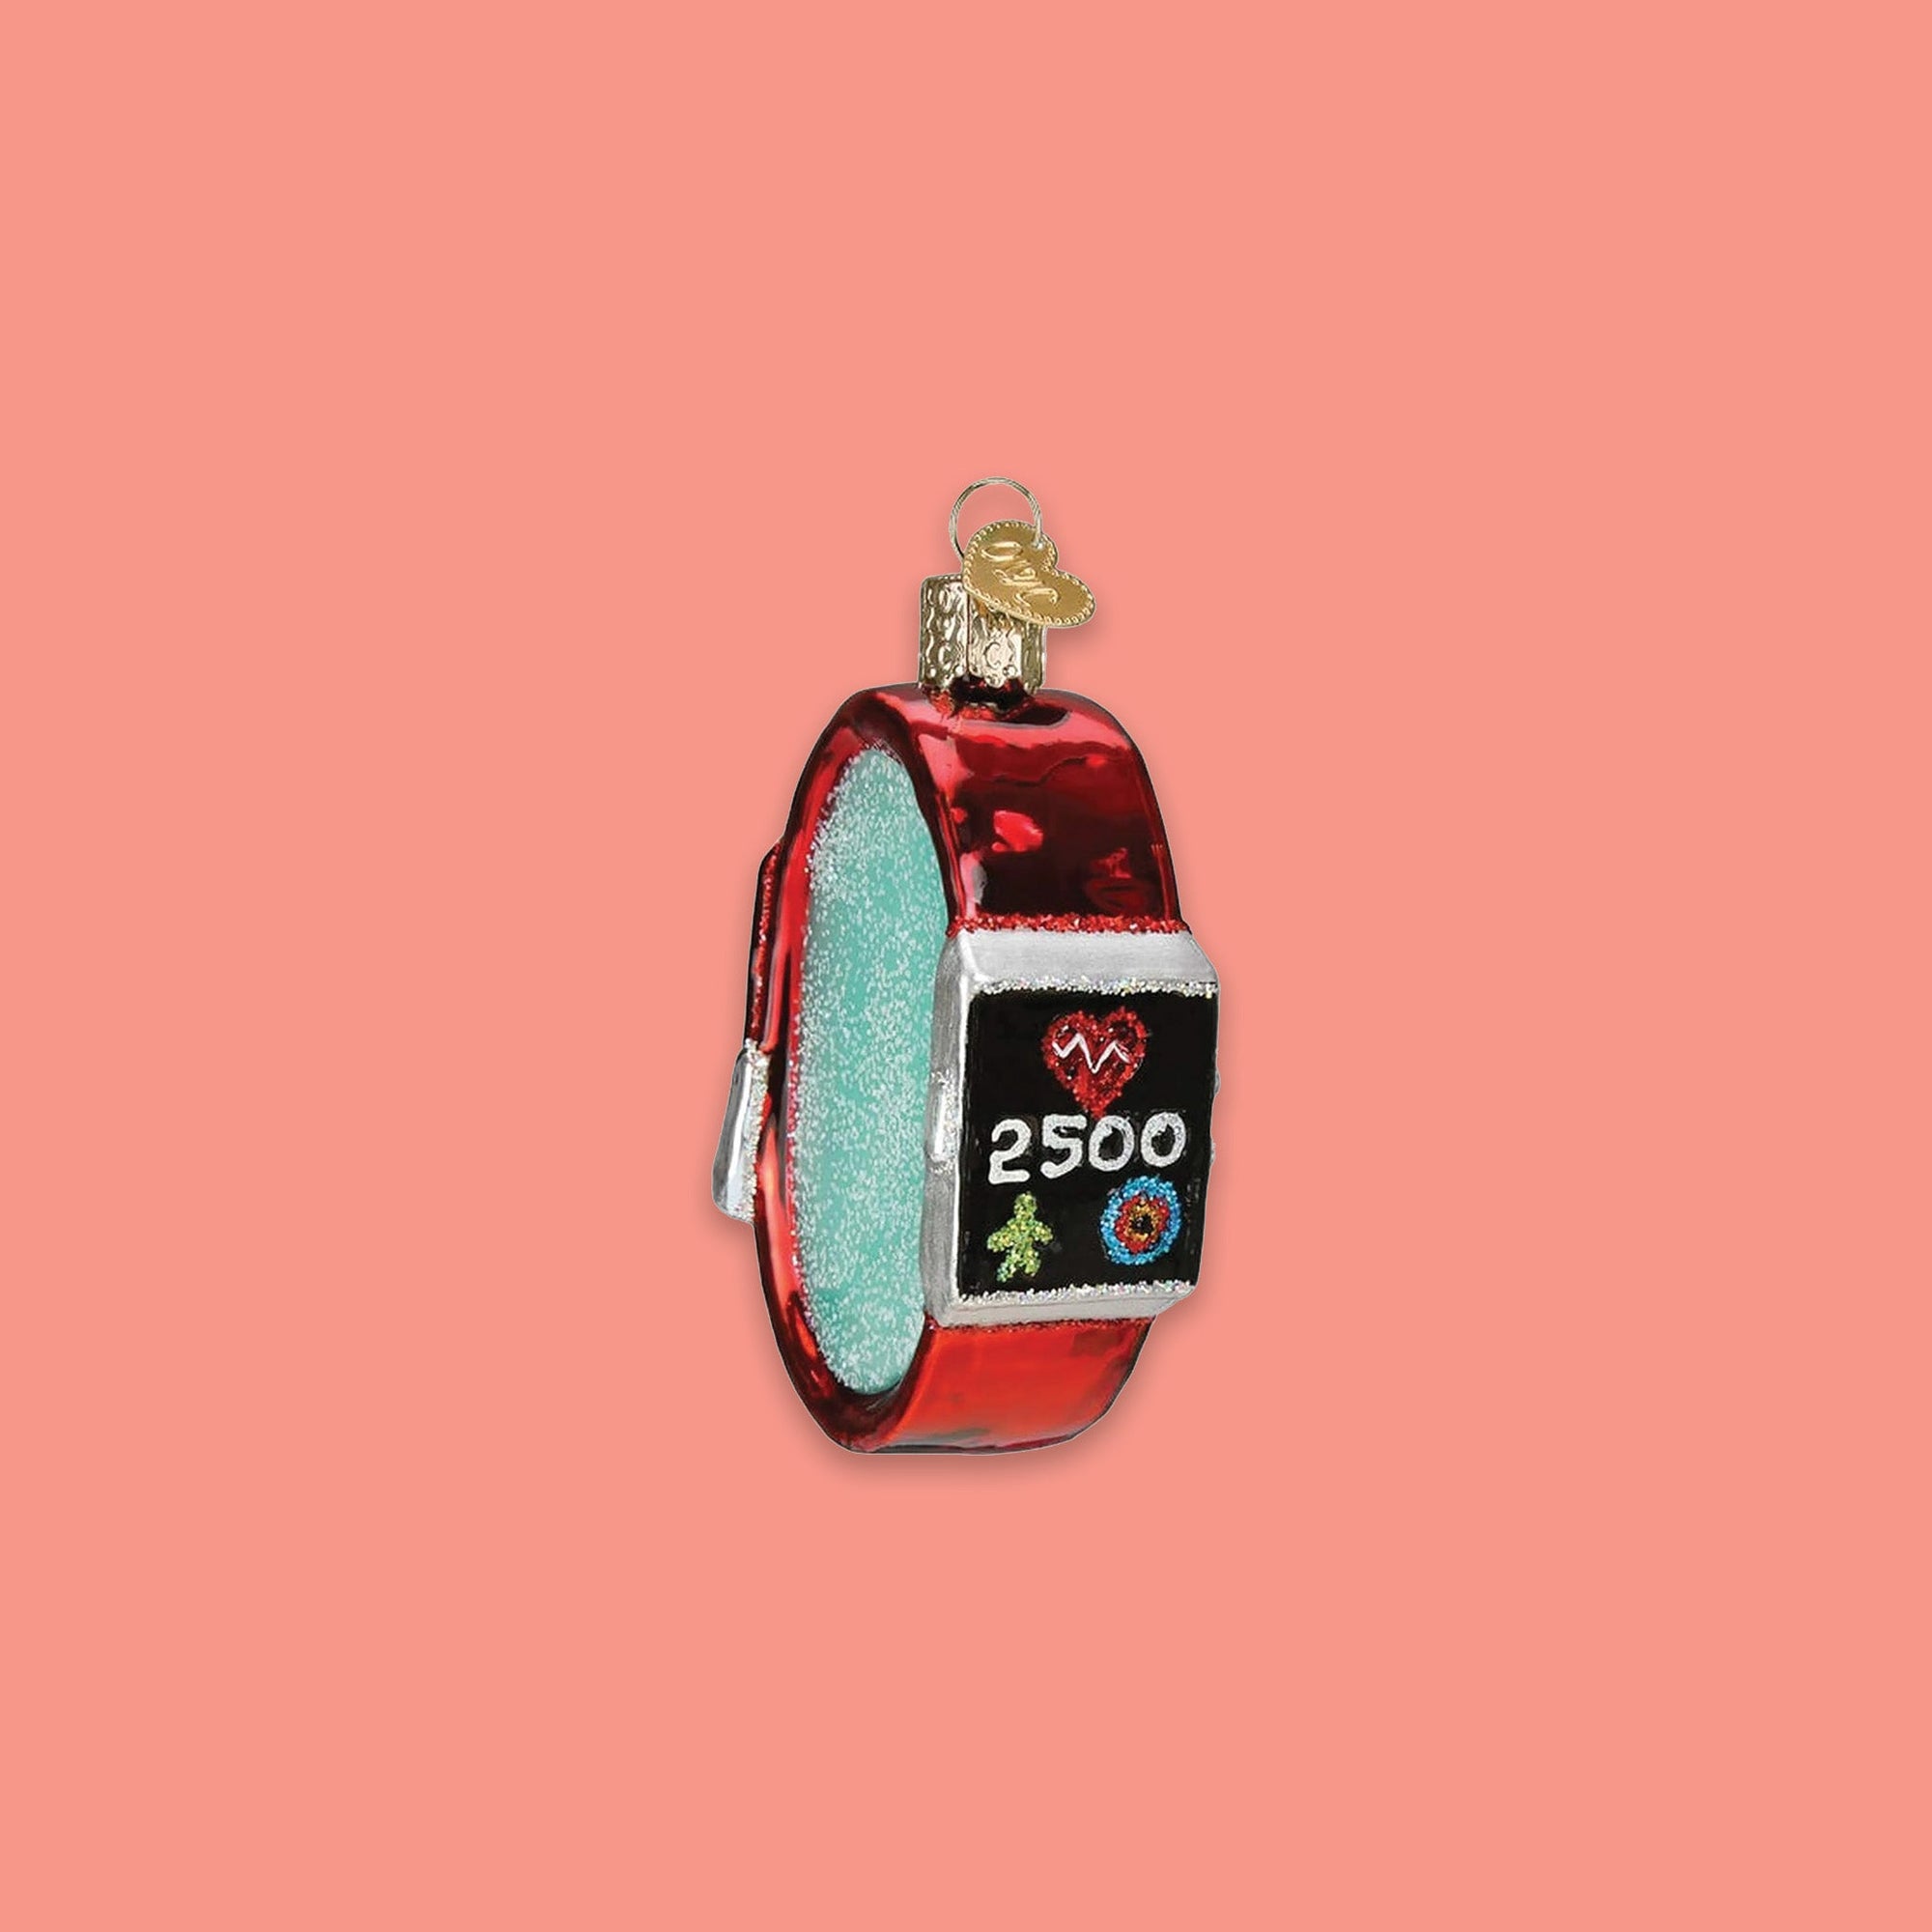 On a coral pink background sits a watch ornament. This is a glass ornament of a red fitness watch with a red heart, green person, target rings, and '2500'.